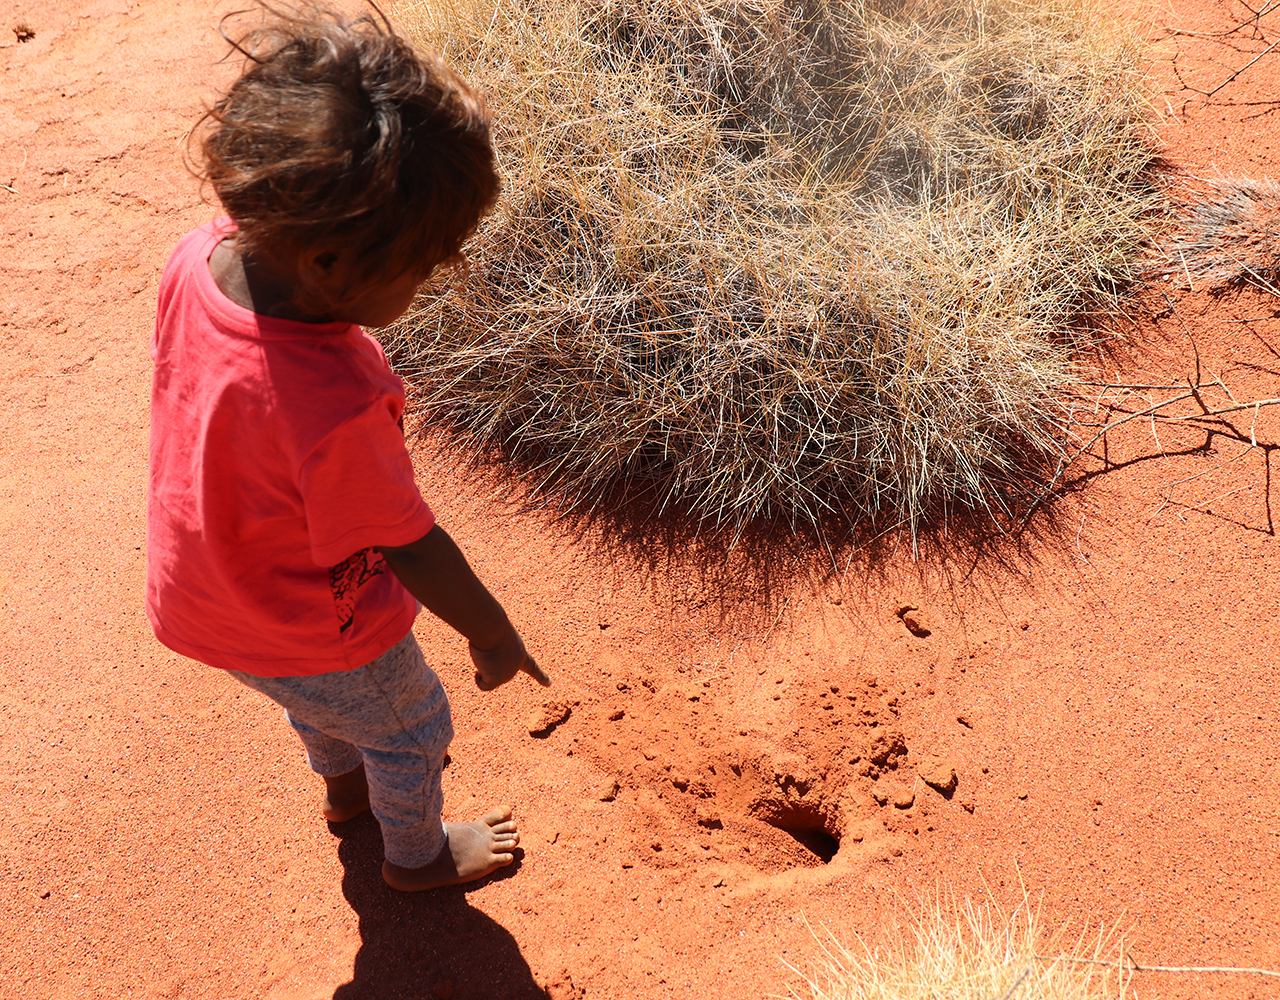 Kids learning to track Mankarr on Martu Country